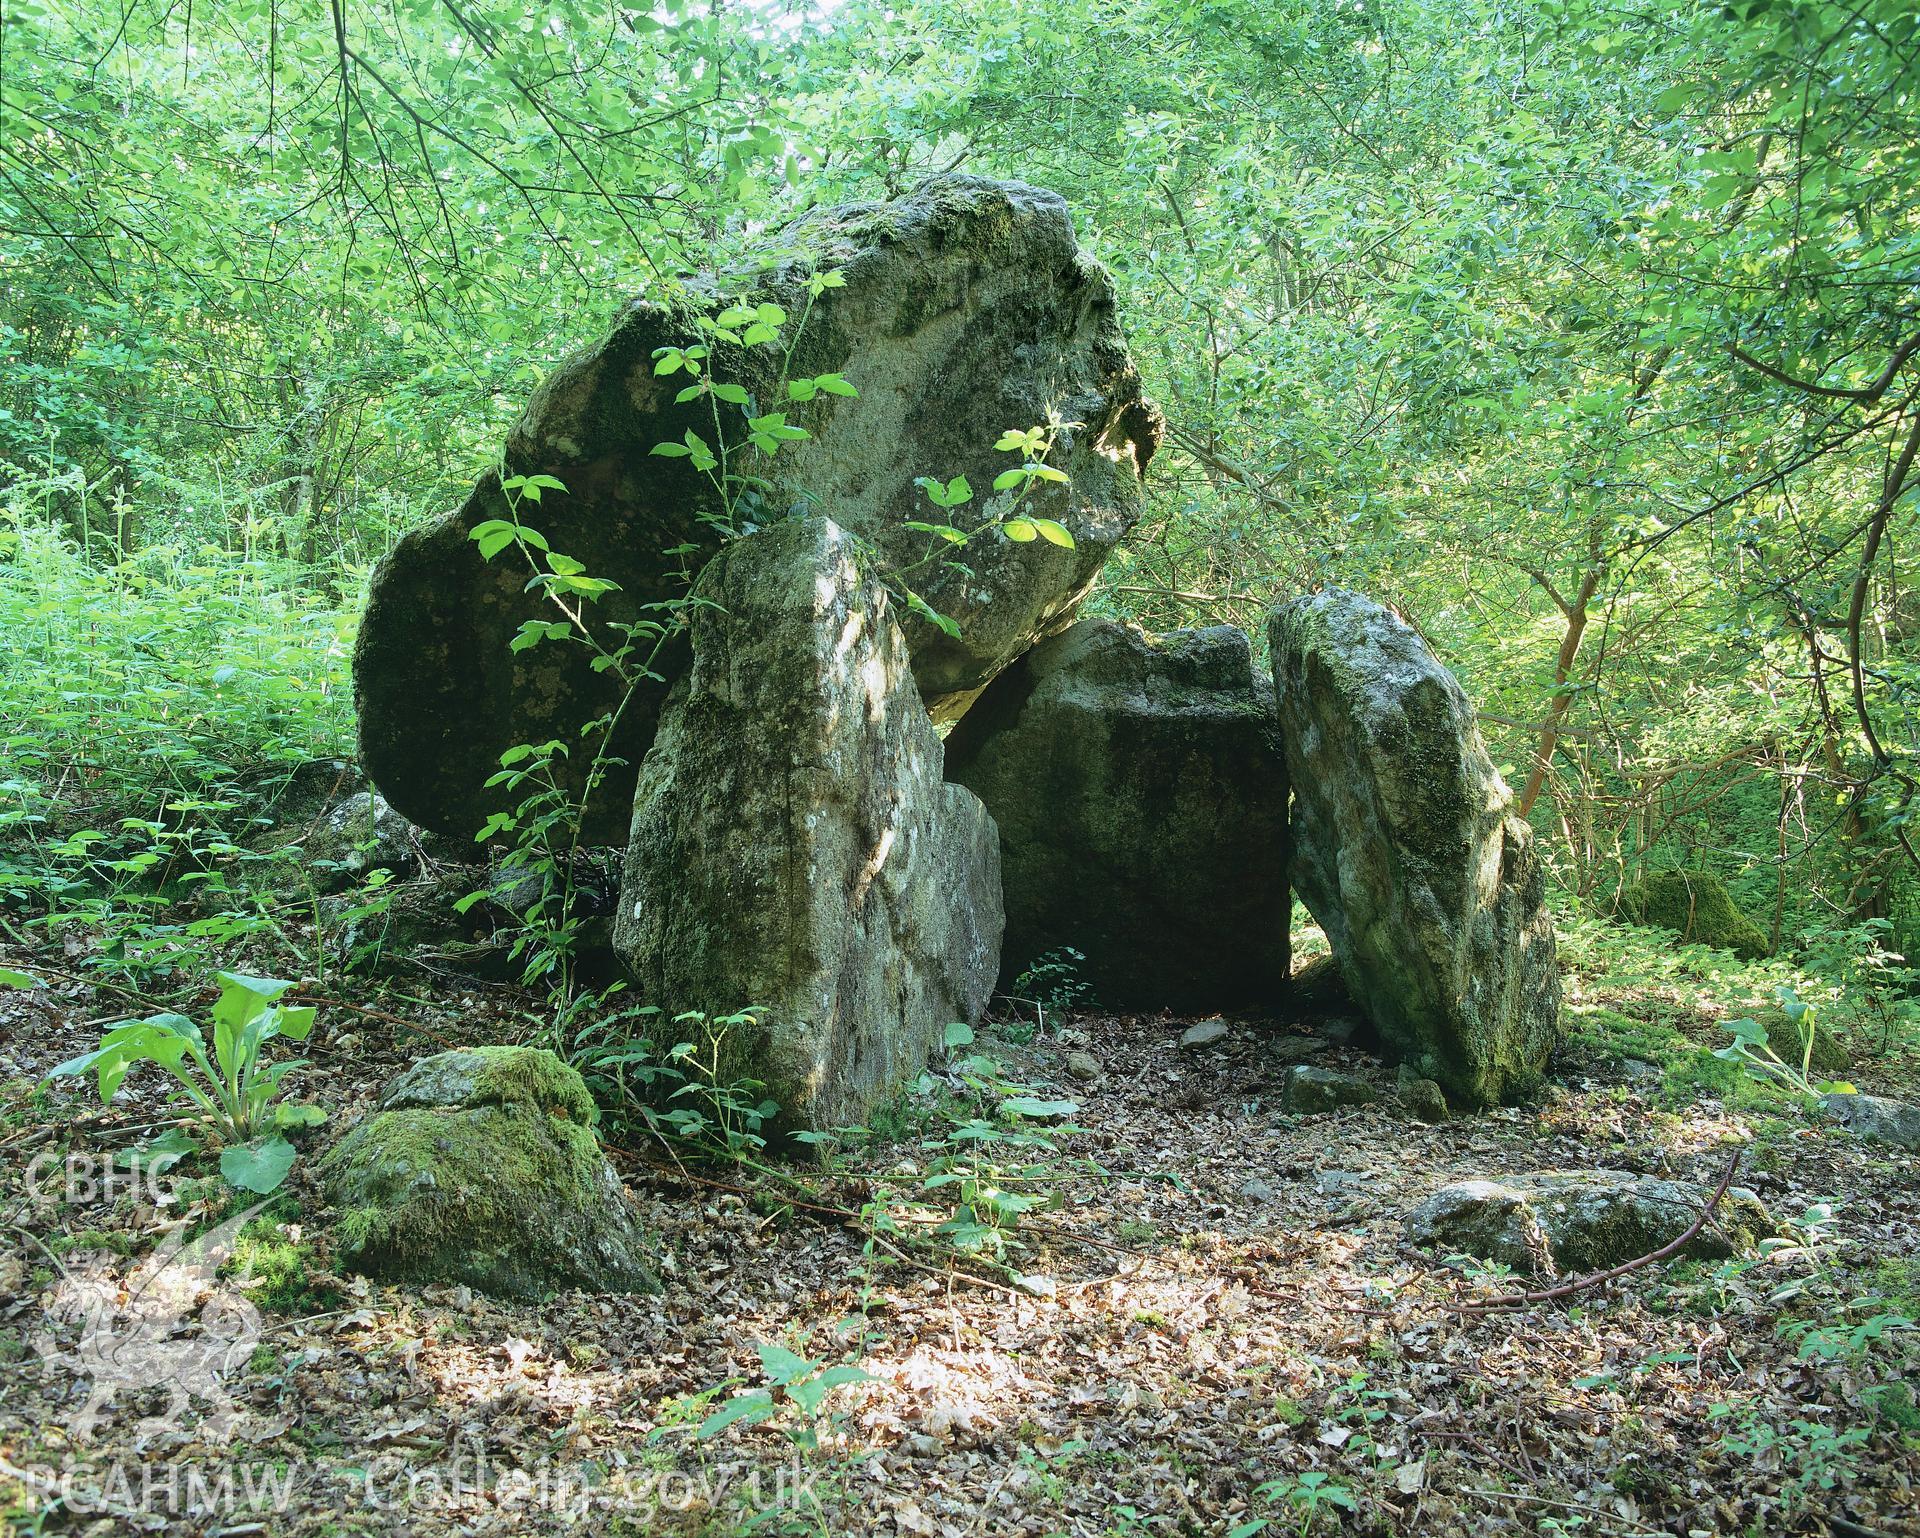 RCAHMW colour transparency showing view of Twlc y Filiast Chambered Tomb, Llangynog.